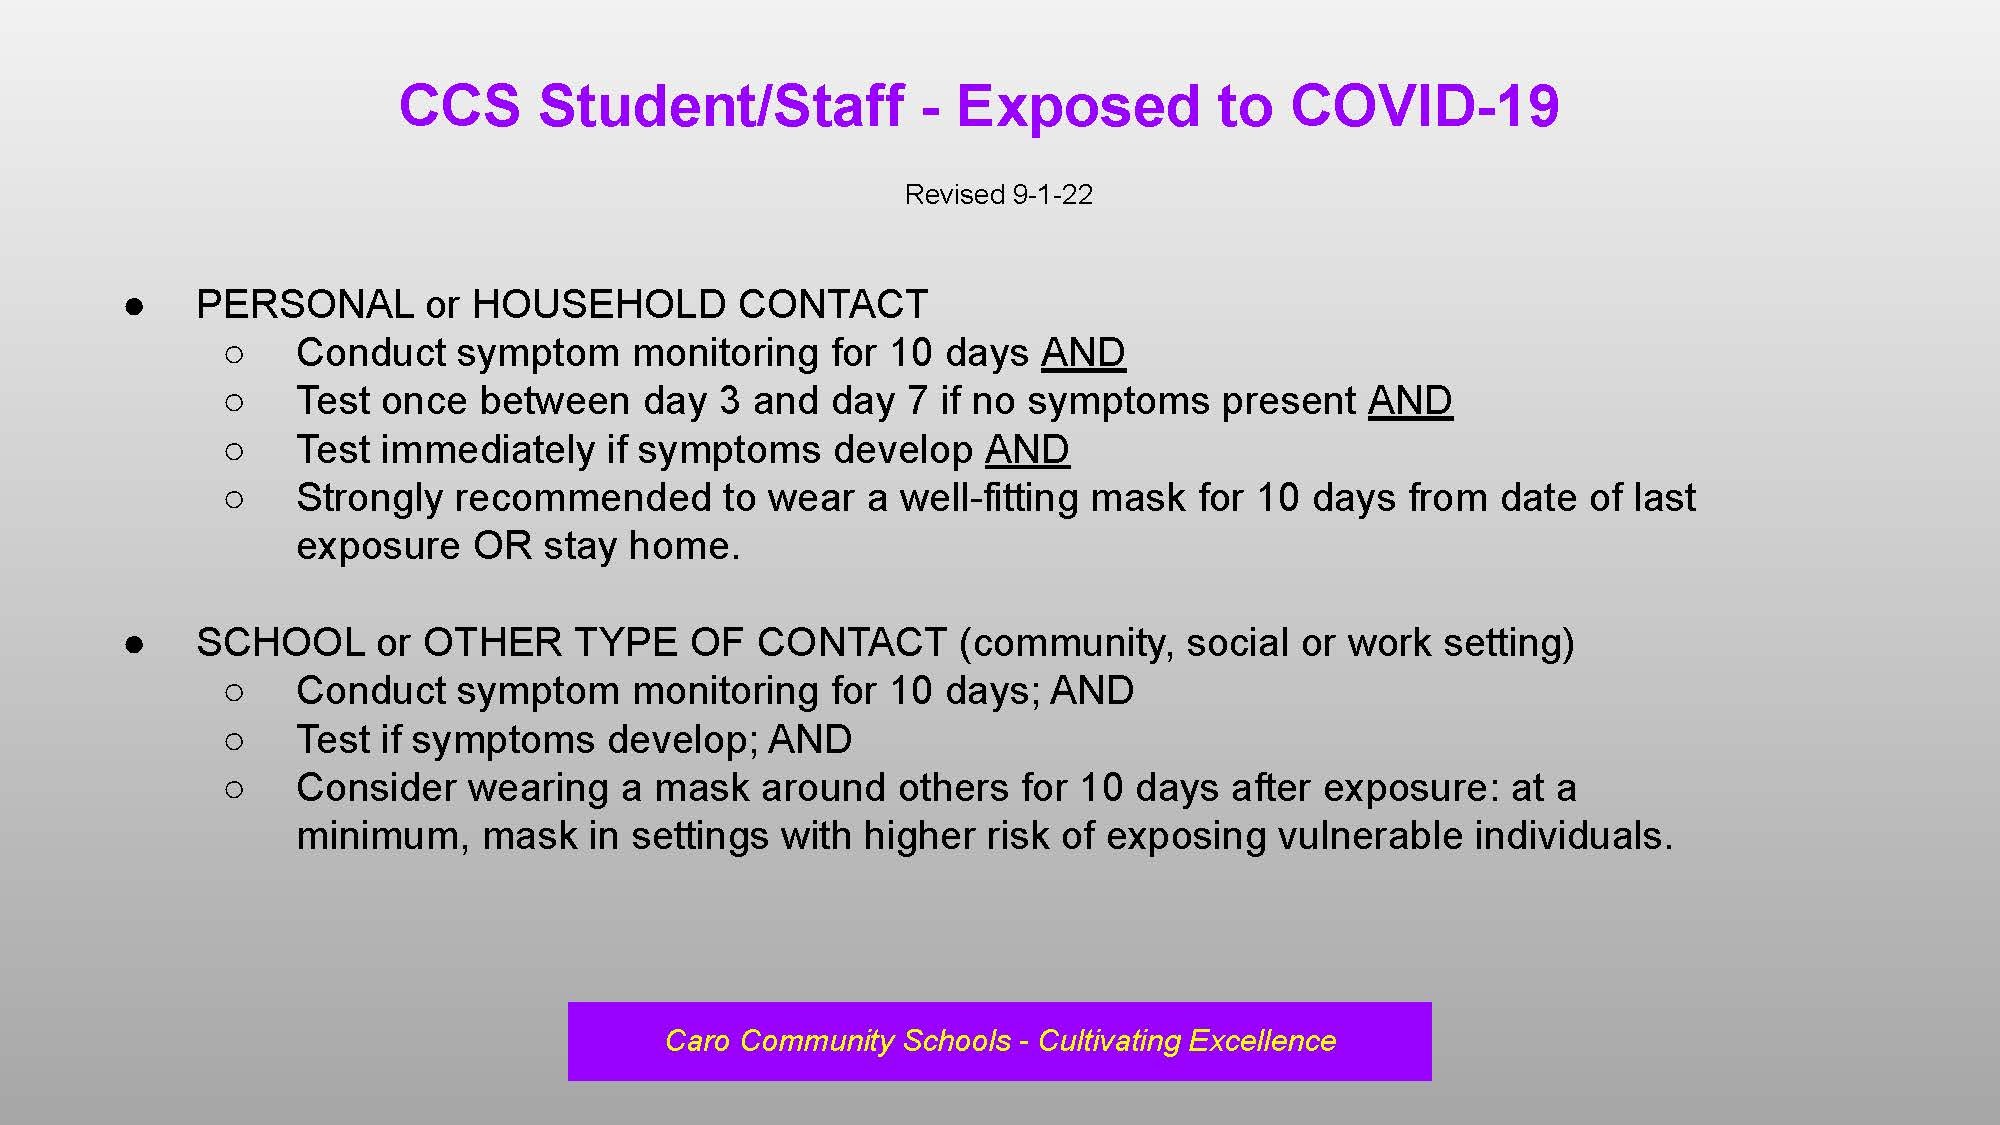 PERSONAL or HOUSEHOLD CONTACT ○ Conduct symptom monitoring for 10 days AND ○ Test once between day 3 and day 7 if no symptoms present AND ○ Test immediately if symptoms develop AND ○ Strongly recommended to wear a well-fitting mask for 10 days from date of last exposure OR stay home. ● SCHOOL or OTHER TYPE OF CONTACT (community, social or work setting) ○ Conduct symptom monitoring for 10 days; AND ○ Test if symptoms develop; AND ○ Consider wearing a mask around others for 10 days after exposure: at a minimum, mask in settings with higher risk of exposing vulnerable individuals.